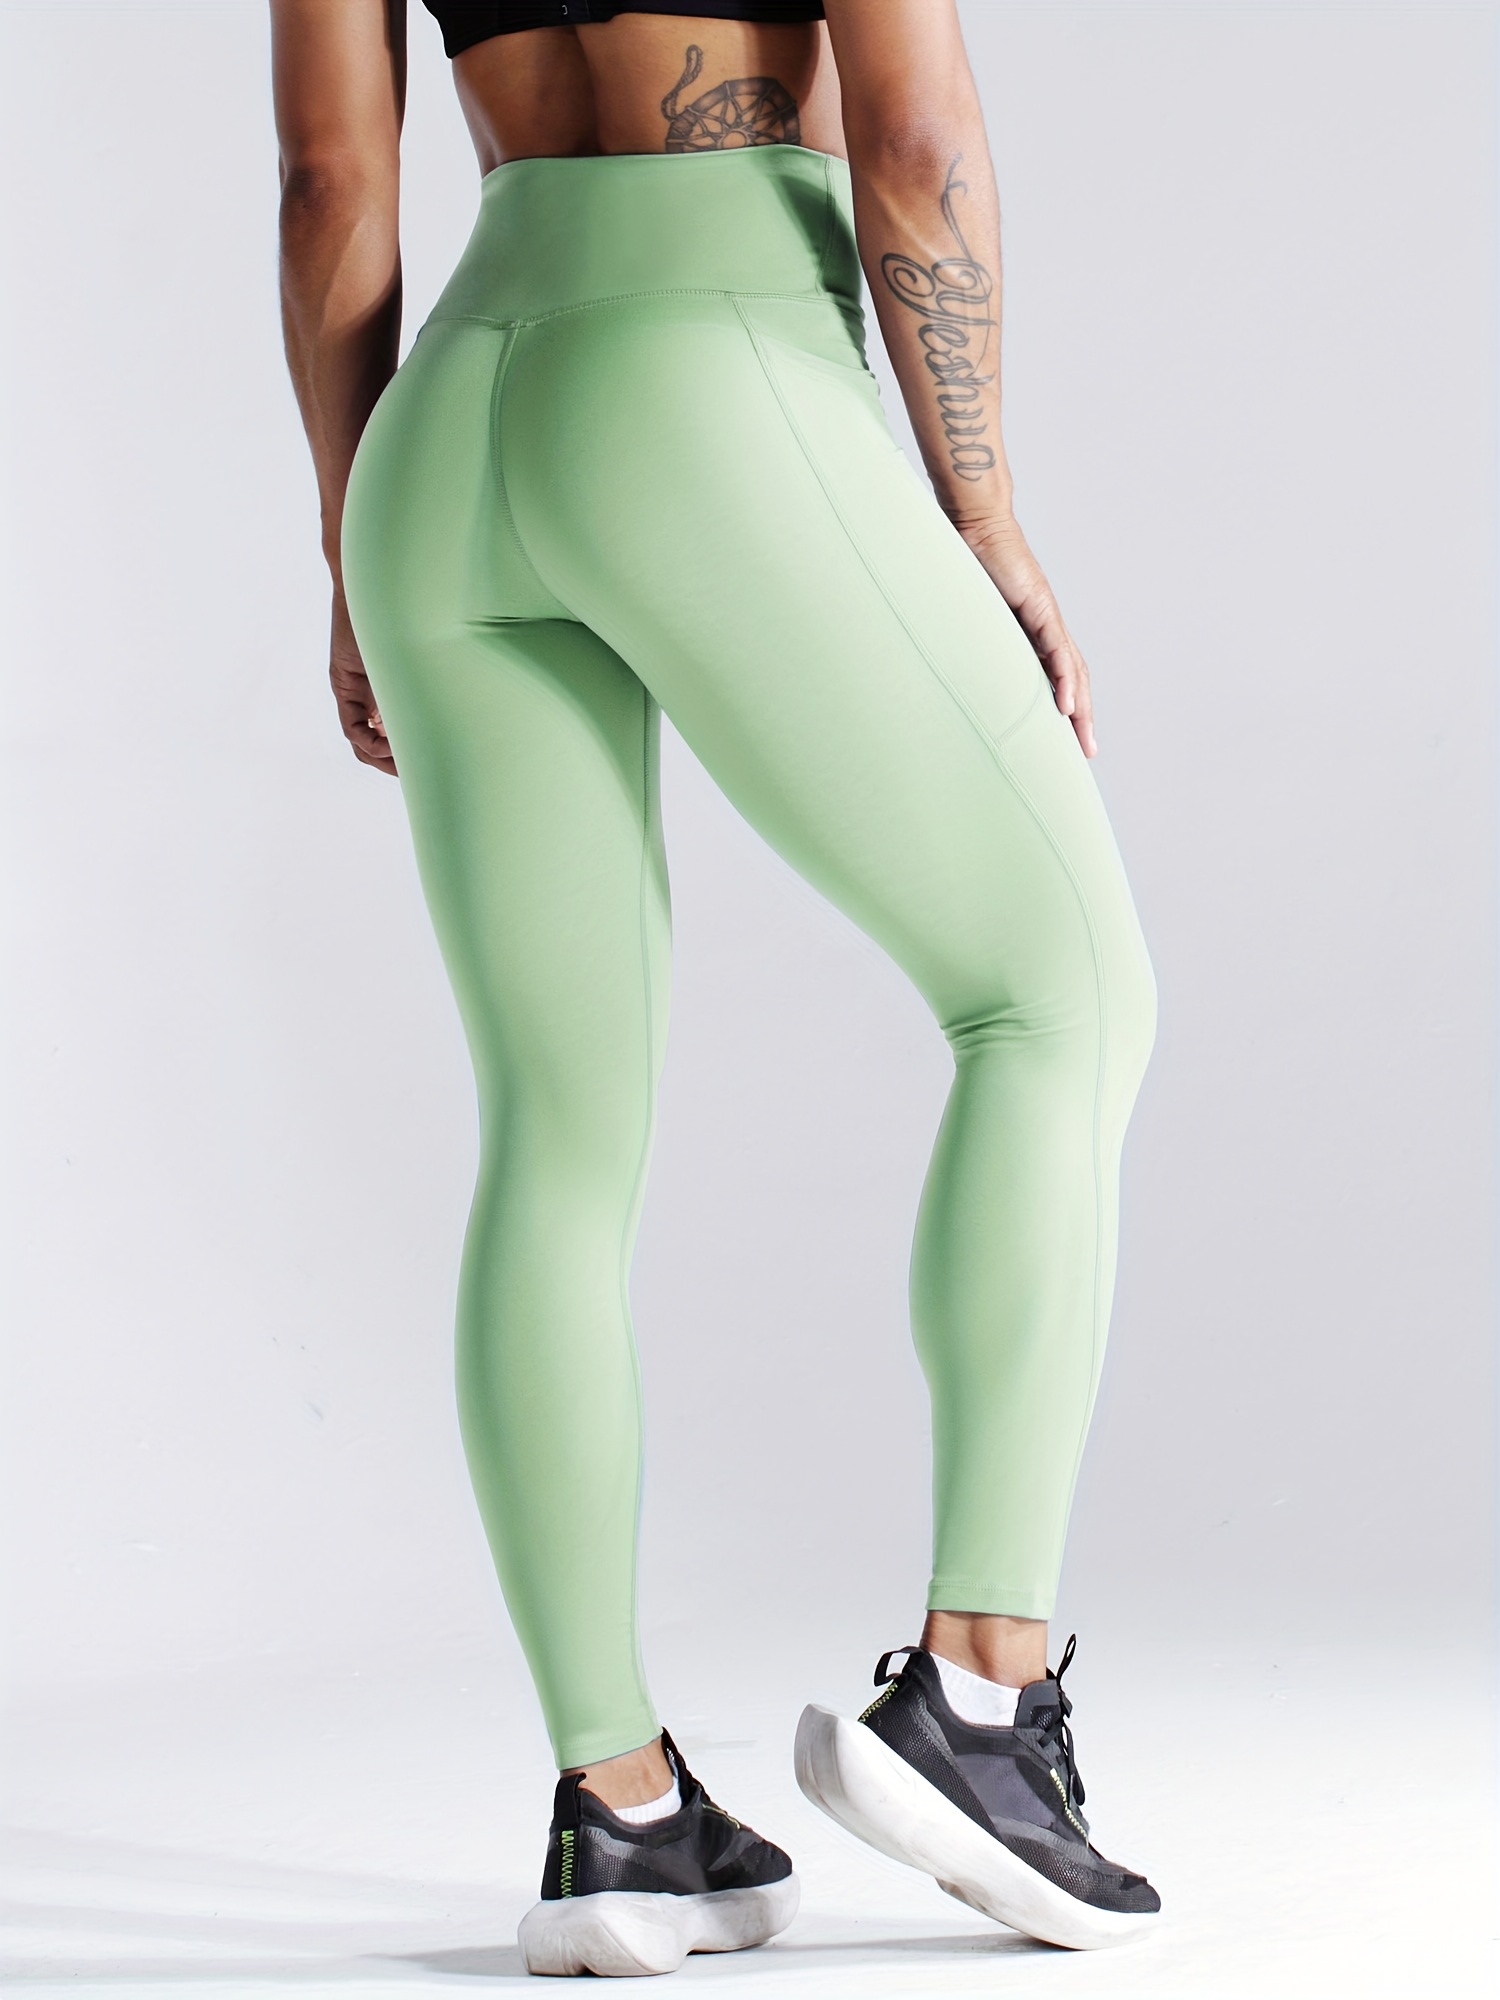 HIGH WAISTED SPORTS LEGGINGS IN SAGE